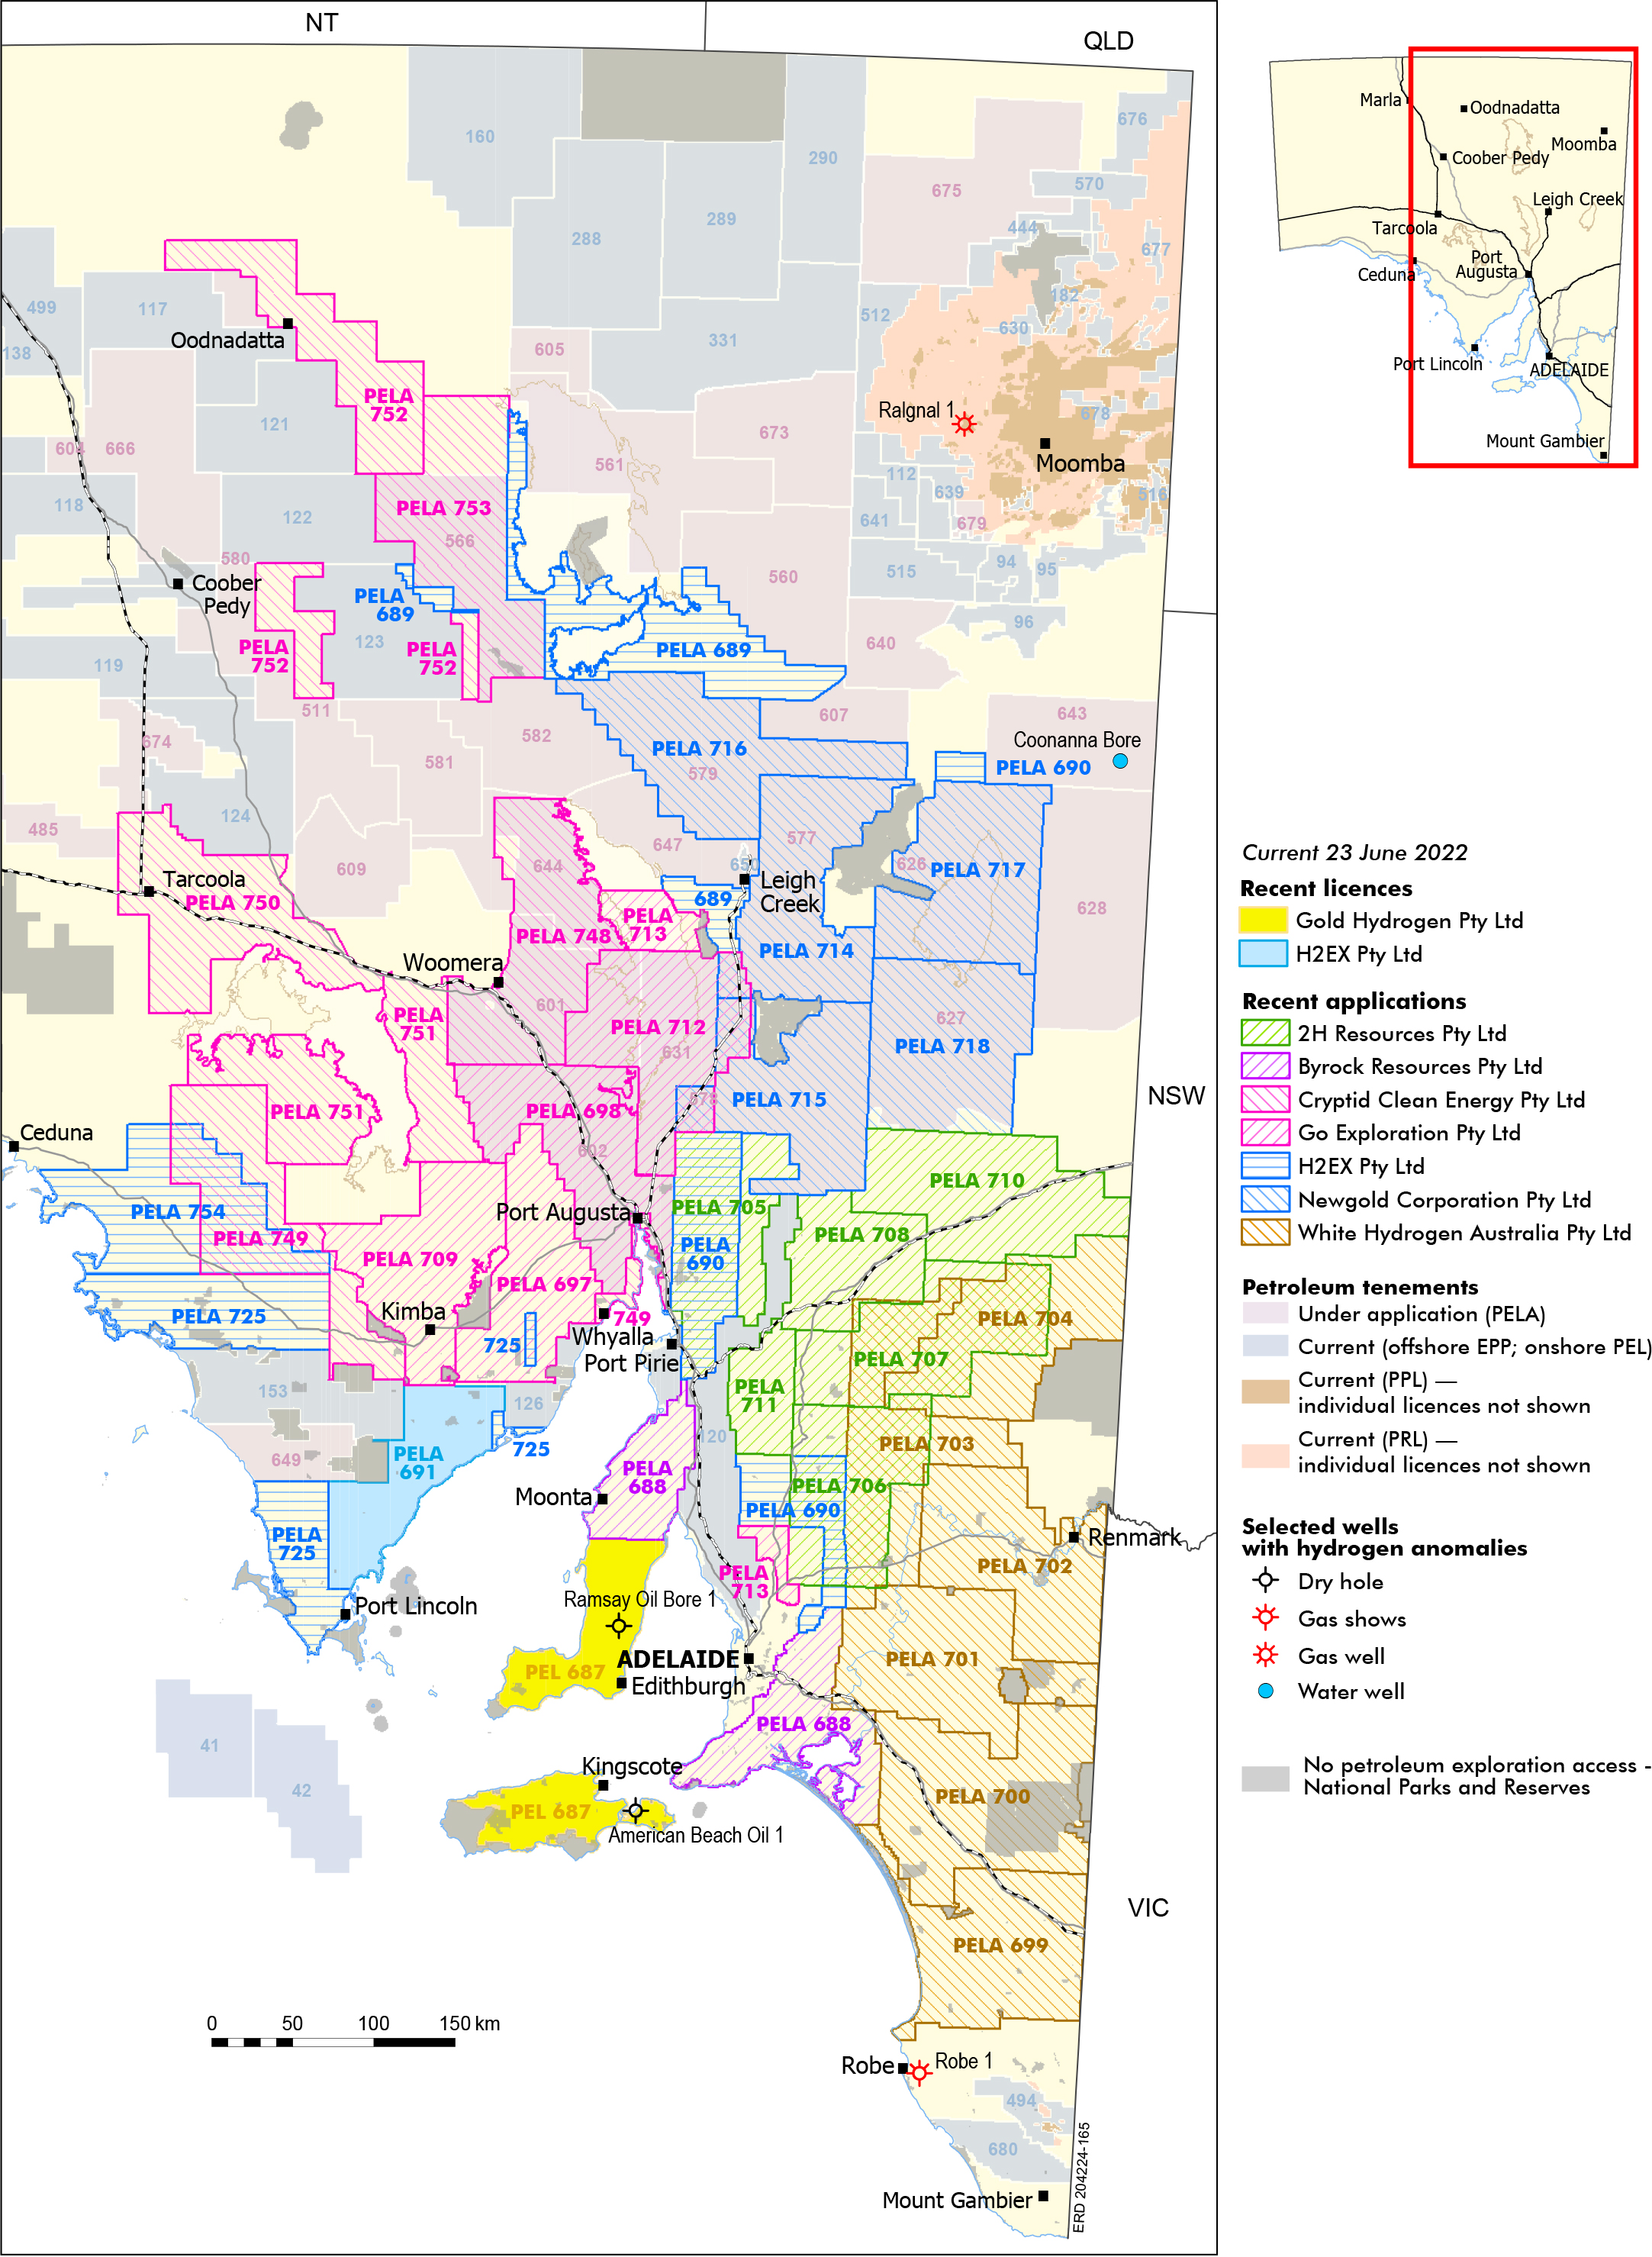 Hydrogen licences and applications in South Australia, colour-coded by company